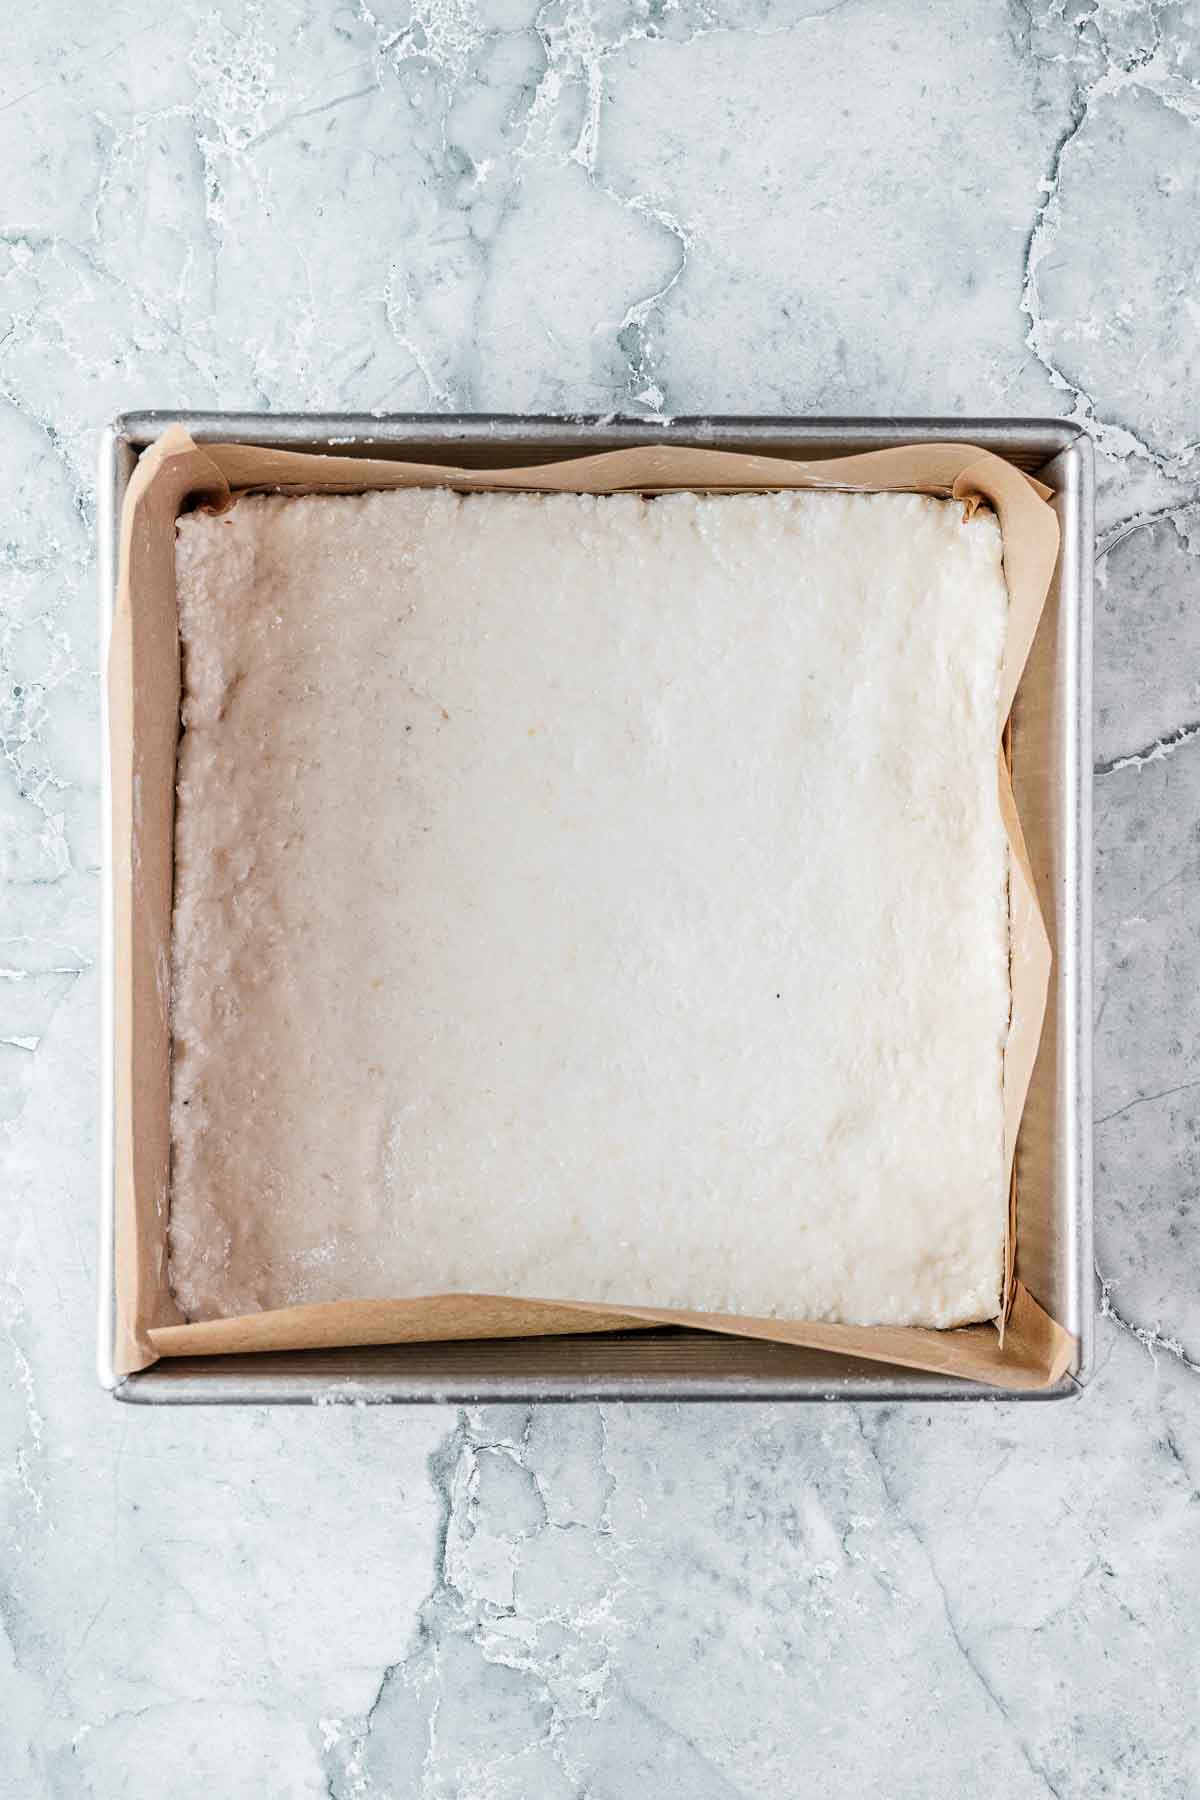 The compacted layer of white coconut ice in a square pan.